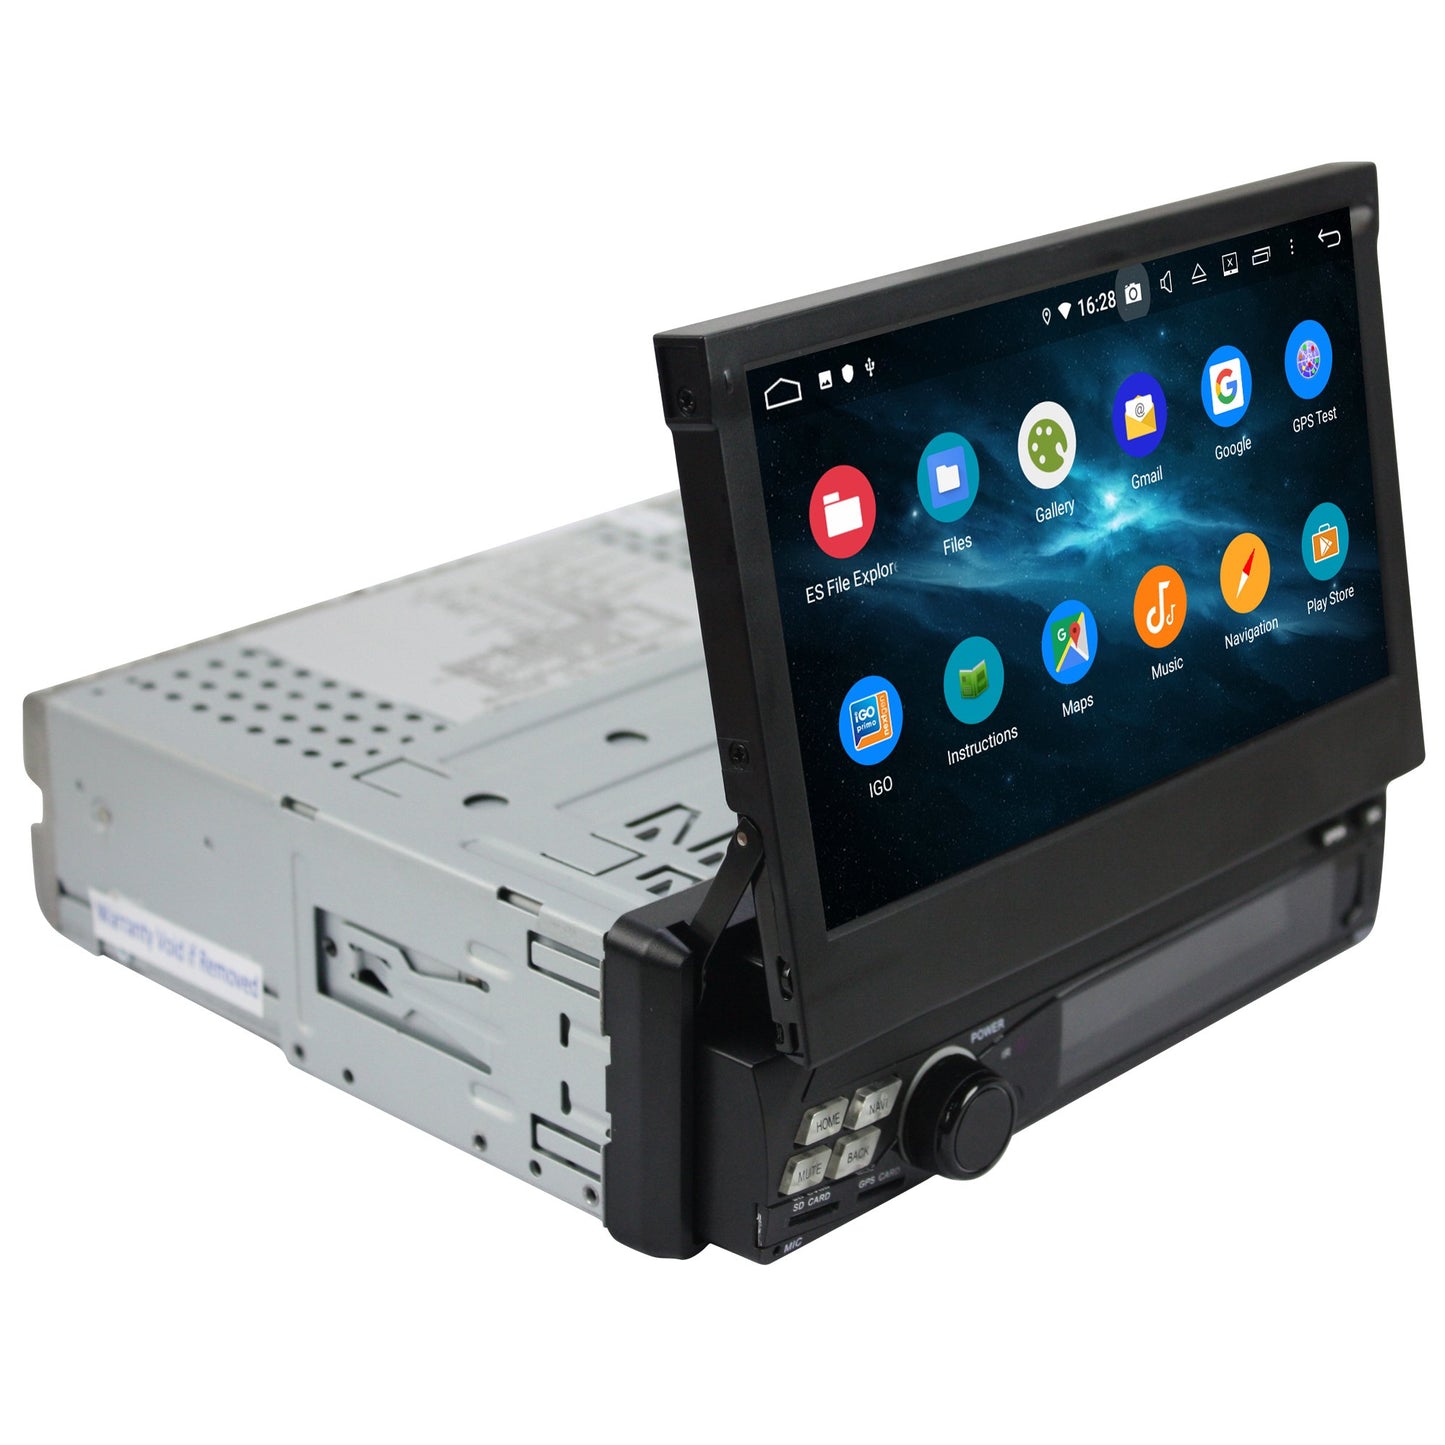 One Din 7" Six-core Eight-core Android 10.0 OEM Navigation Universa Radio - Phoenix Android Radios